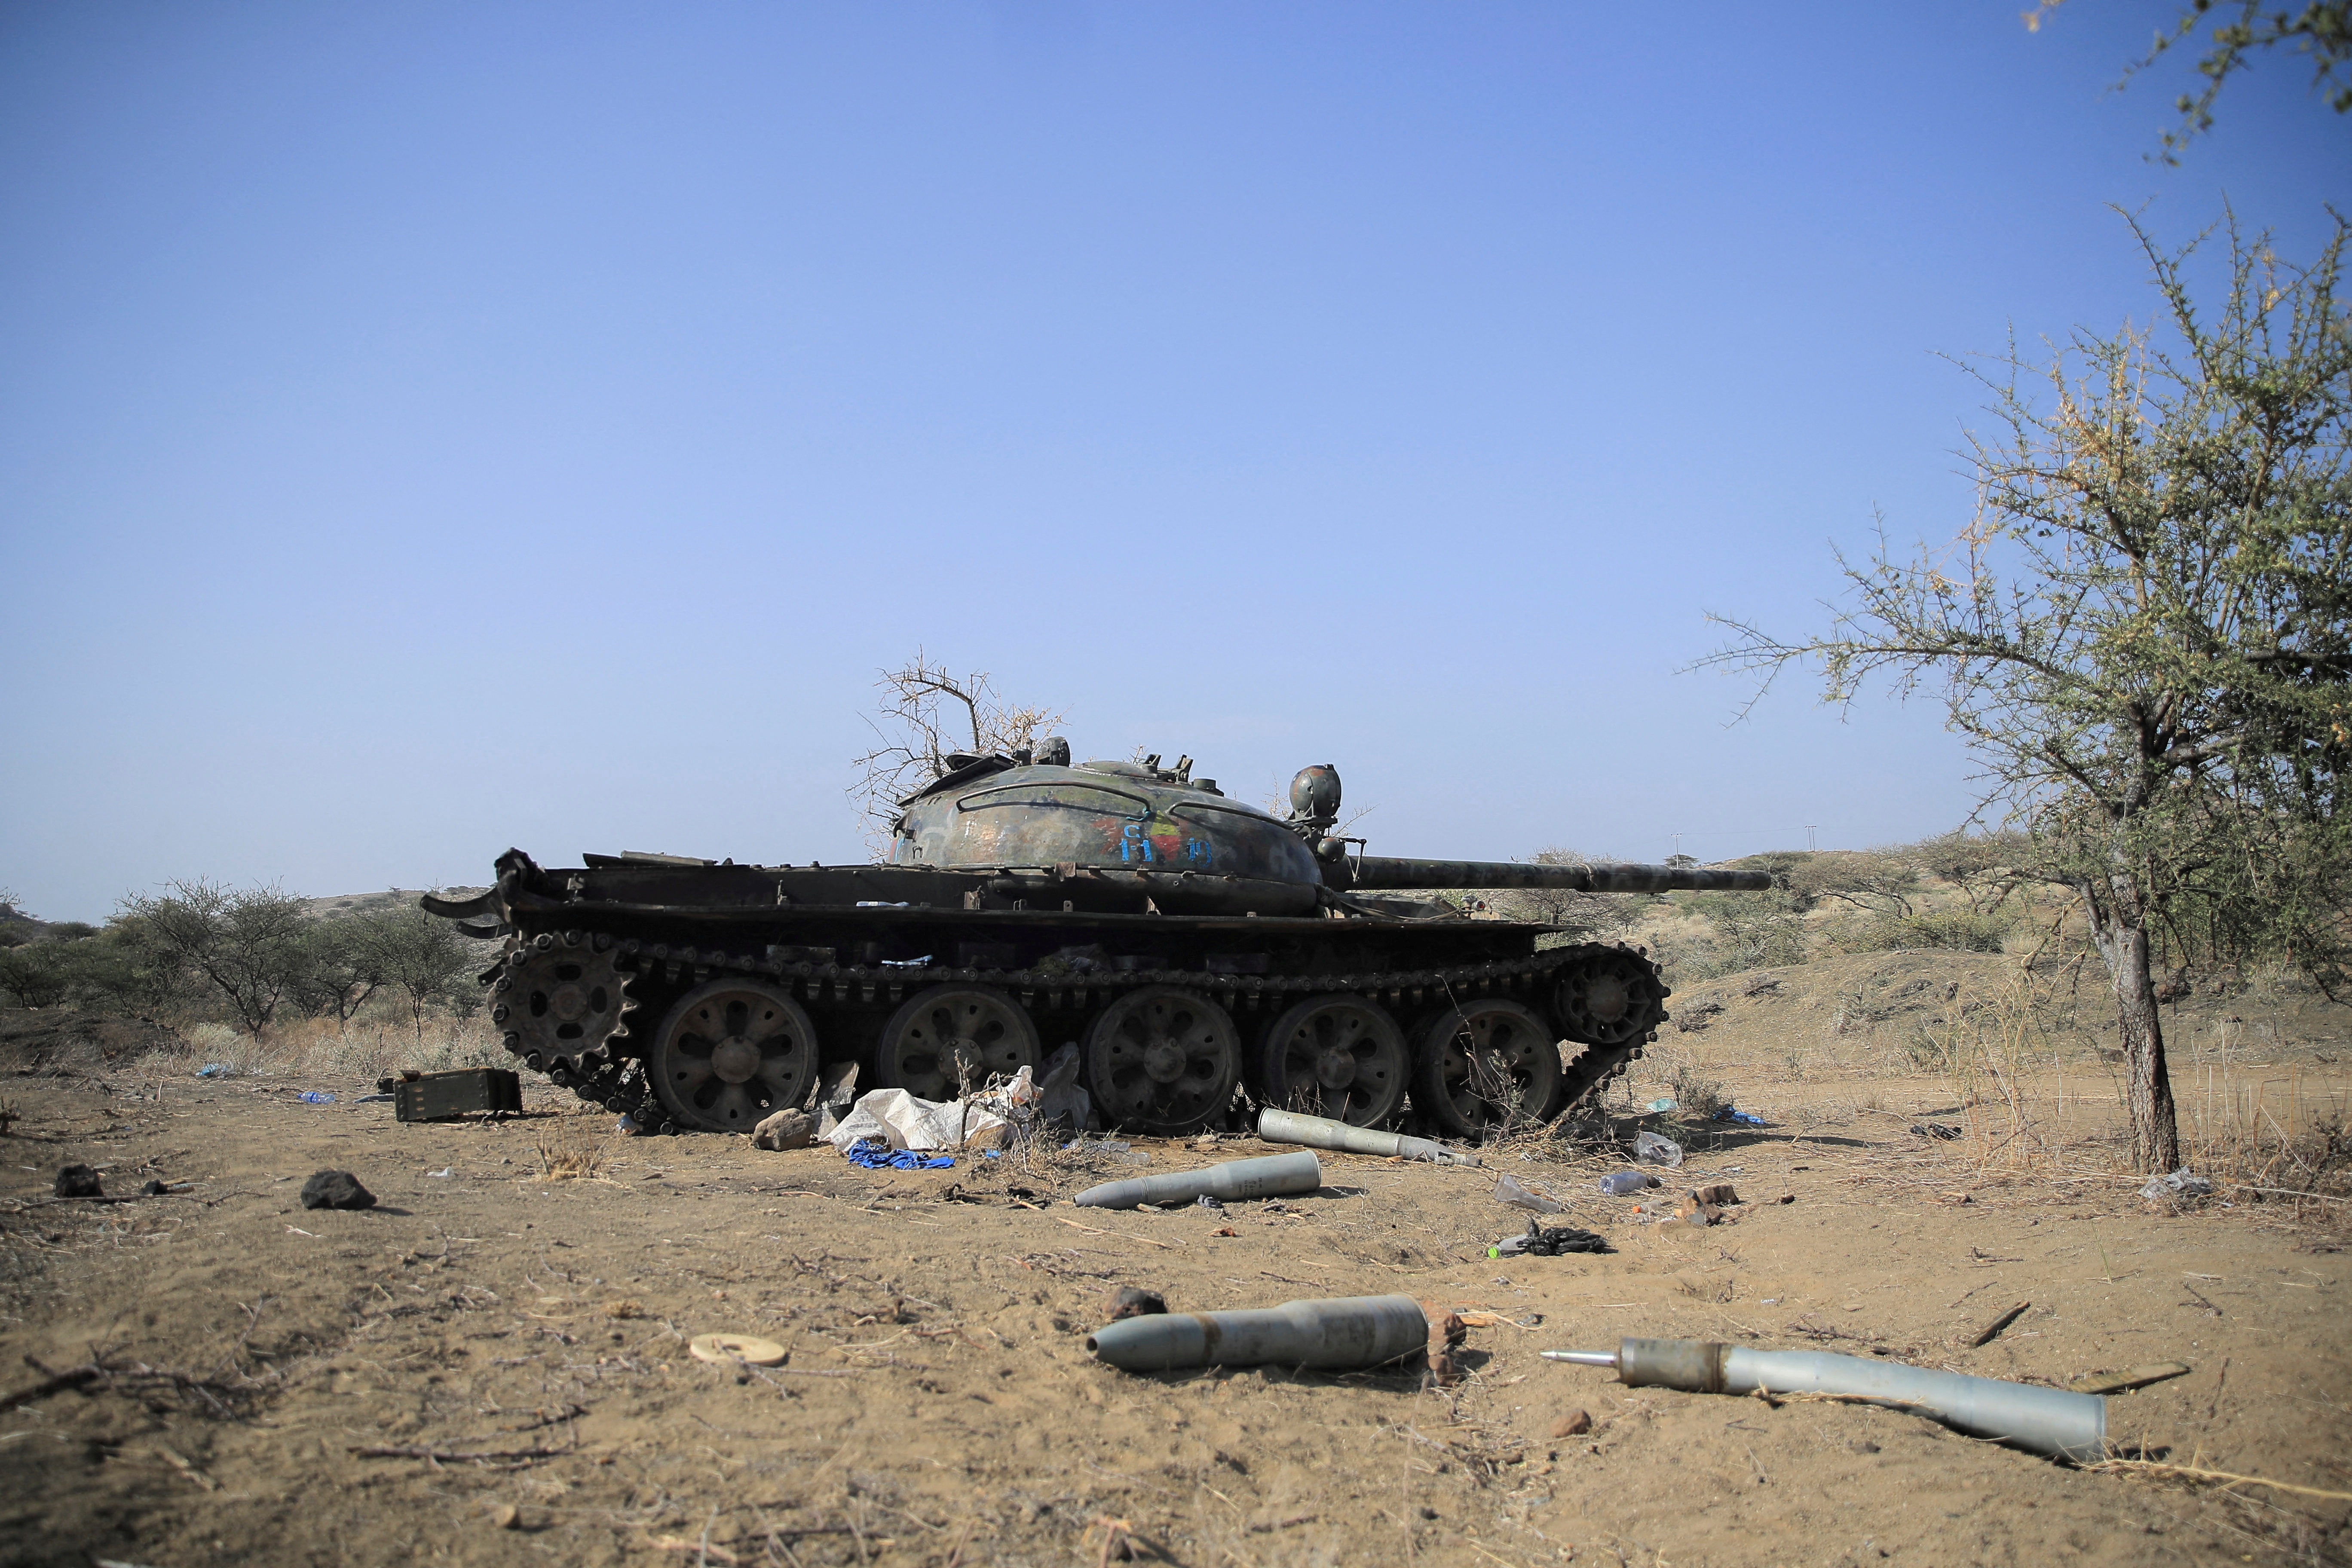 Ammunition is seen next to a tank destroyed in a fight between the Ethiopian National Defence Force (ENDF) and the Tigray People's Liberation Front (TPLF) forces in Kasagita town